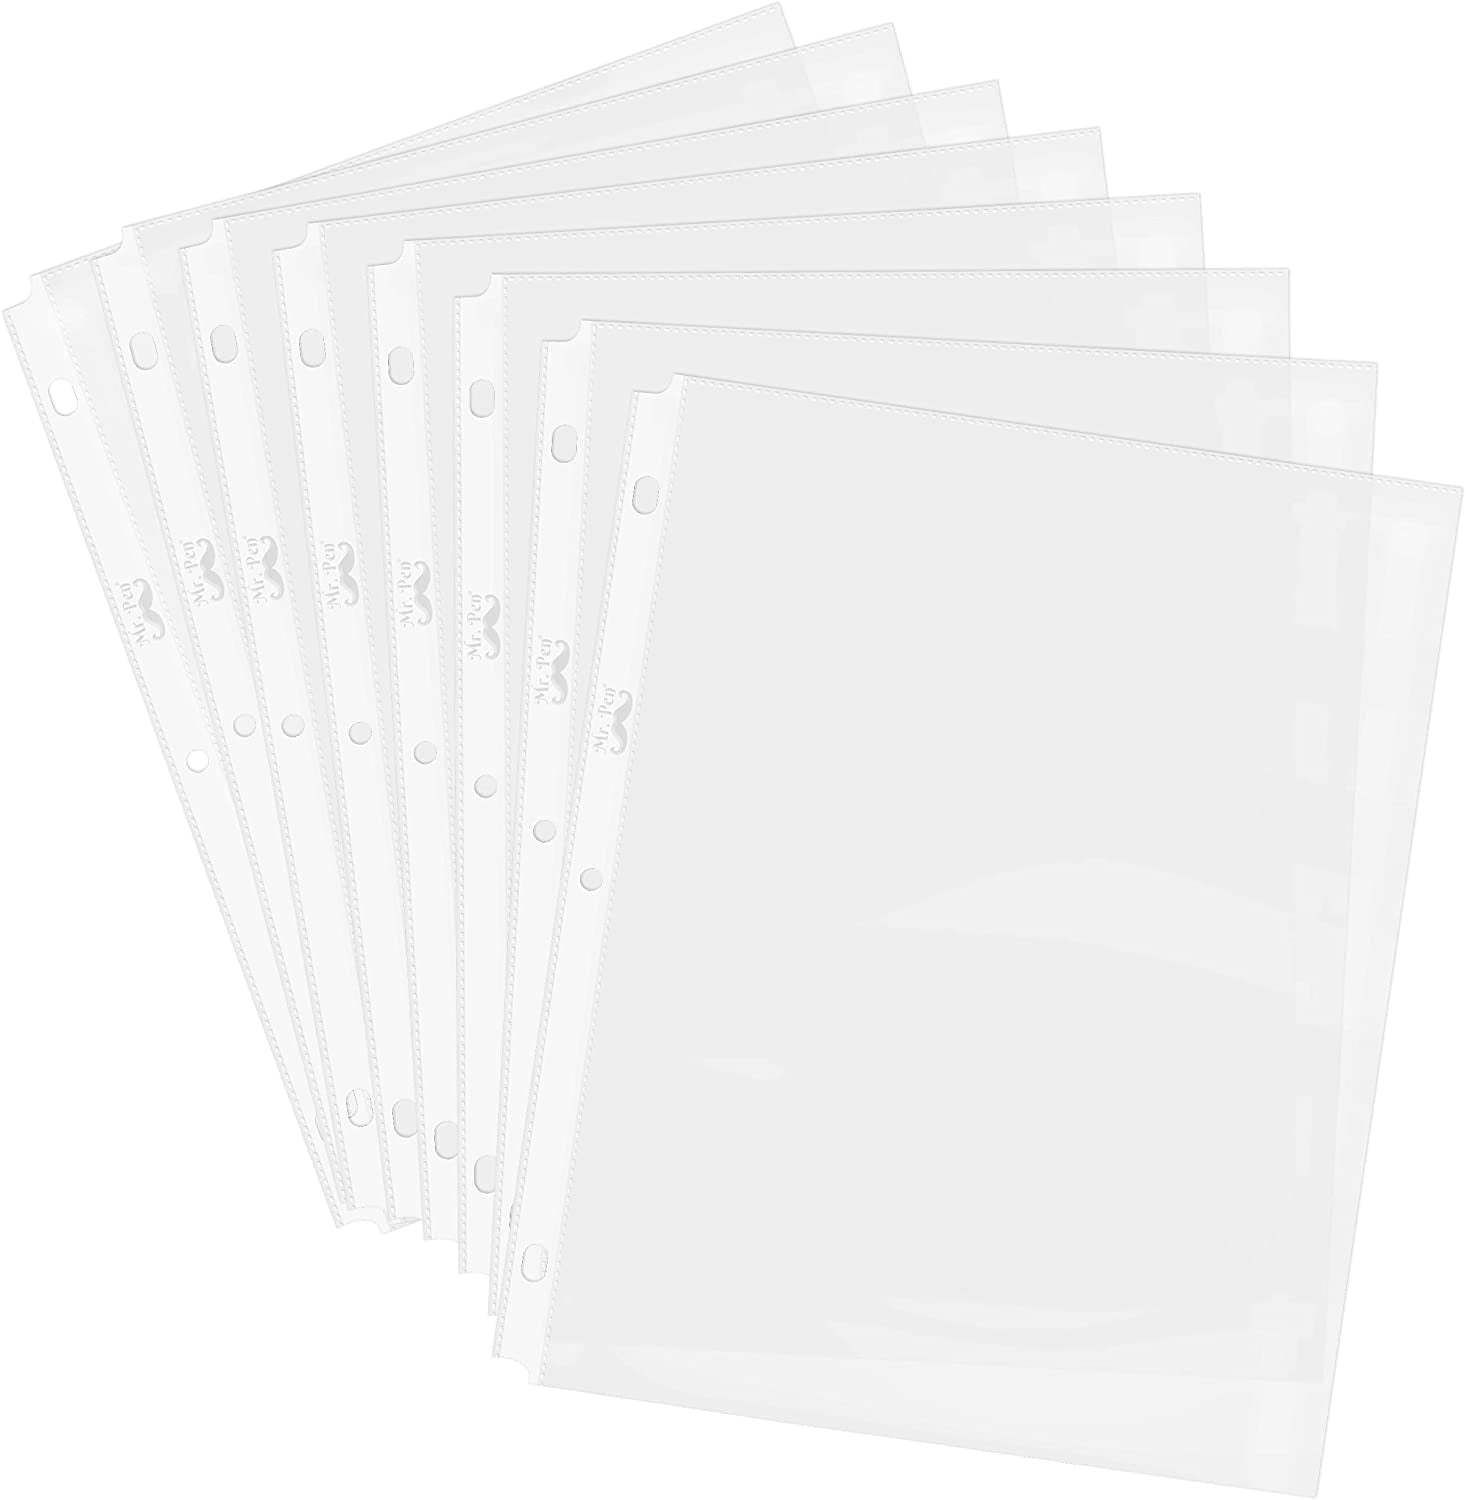 50 Micron Landscape Sheet Protector 8.5 X 11 Clear Pack of 50